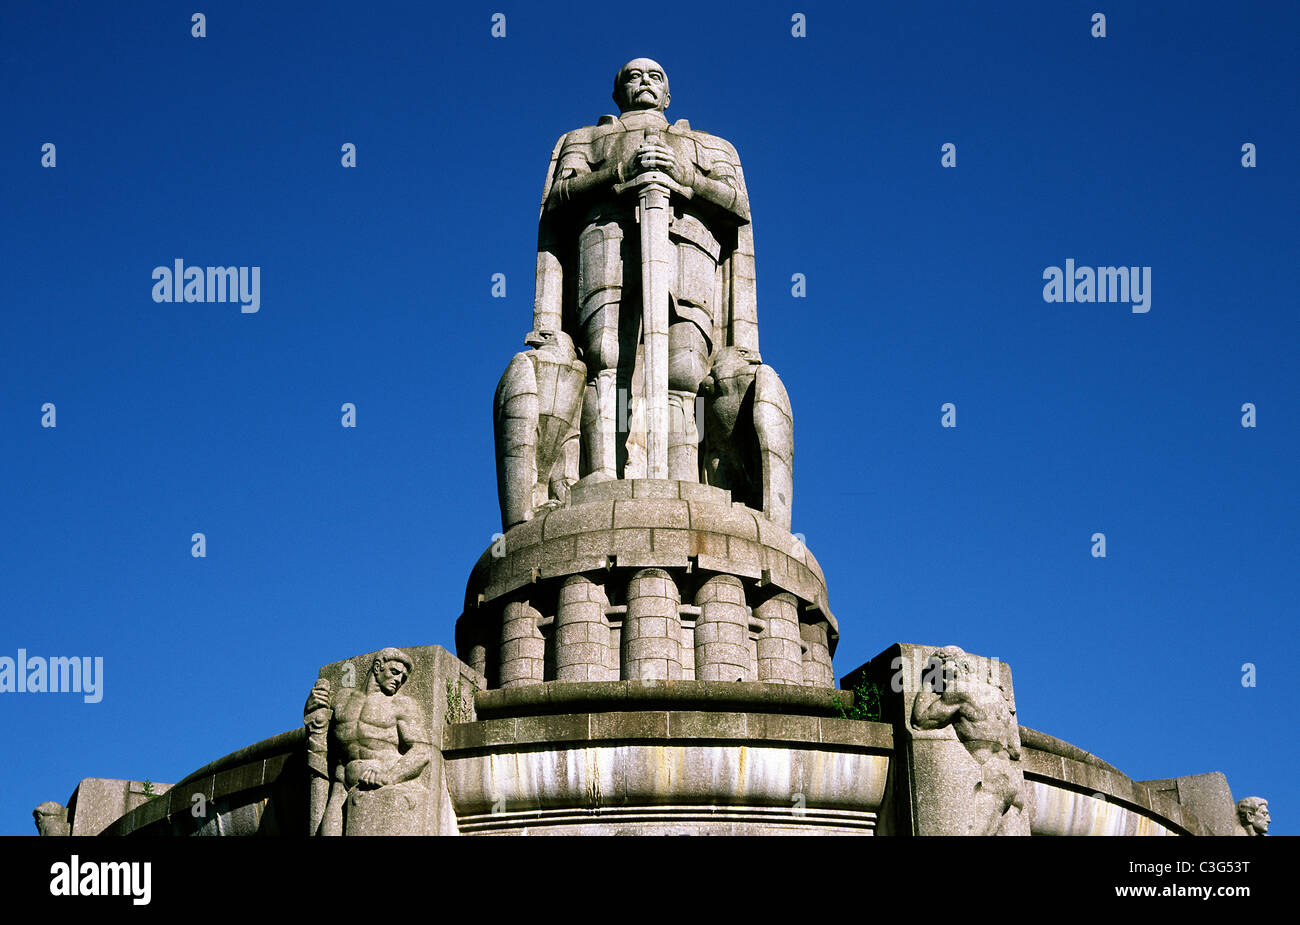 World's largest Otto von Bismarck monument - in Hamburg on top of a former WWII air raid shelter. Stock Photo